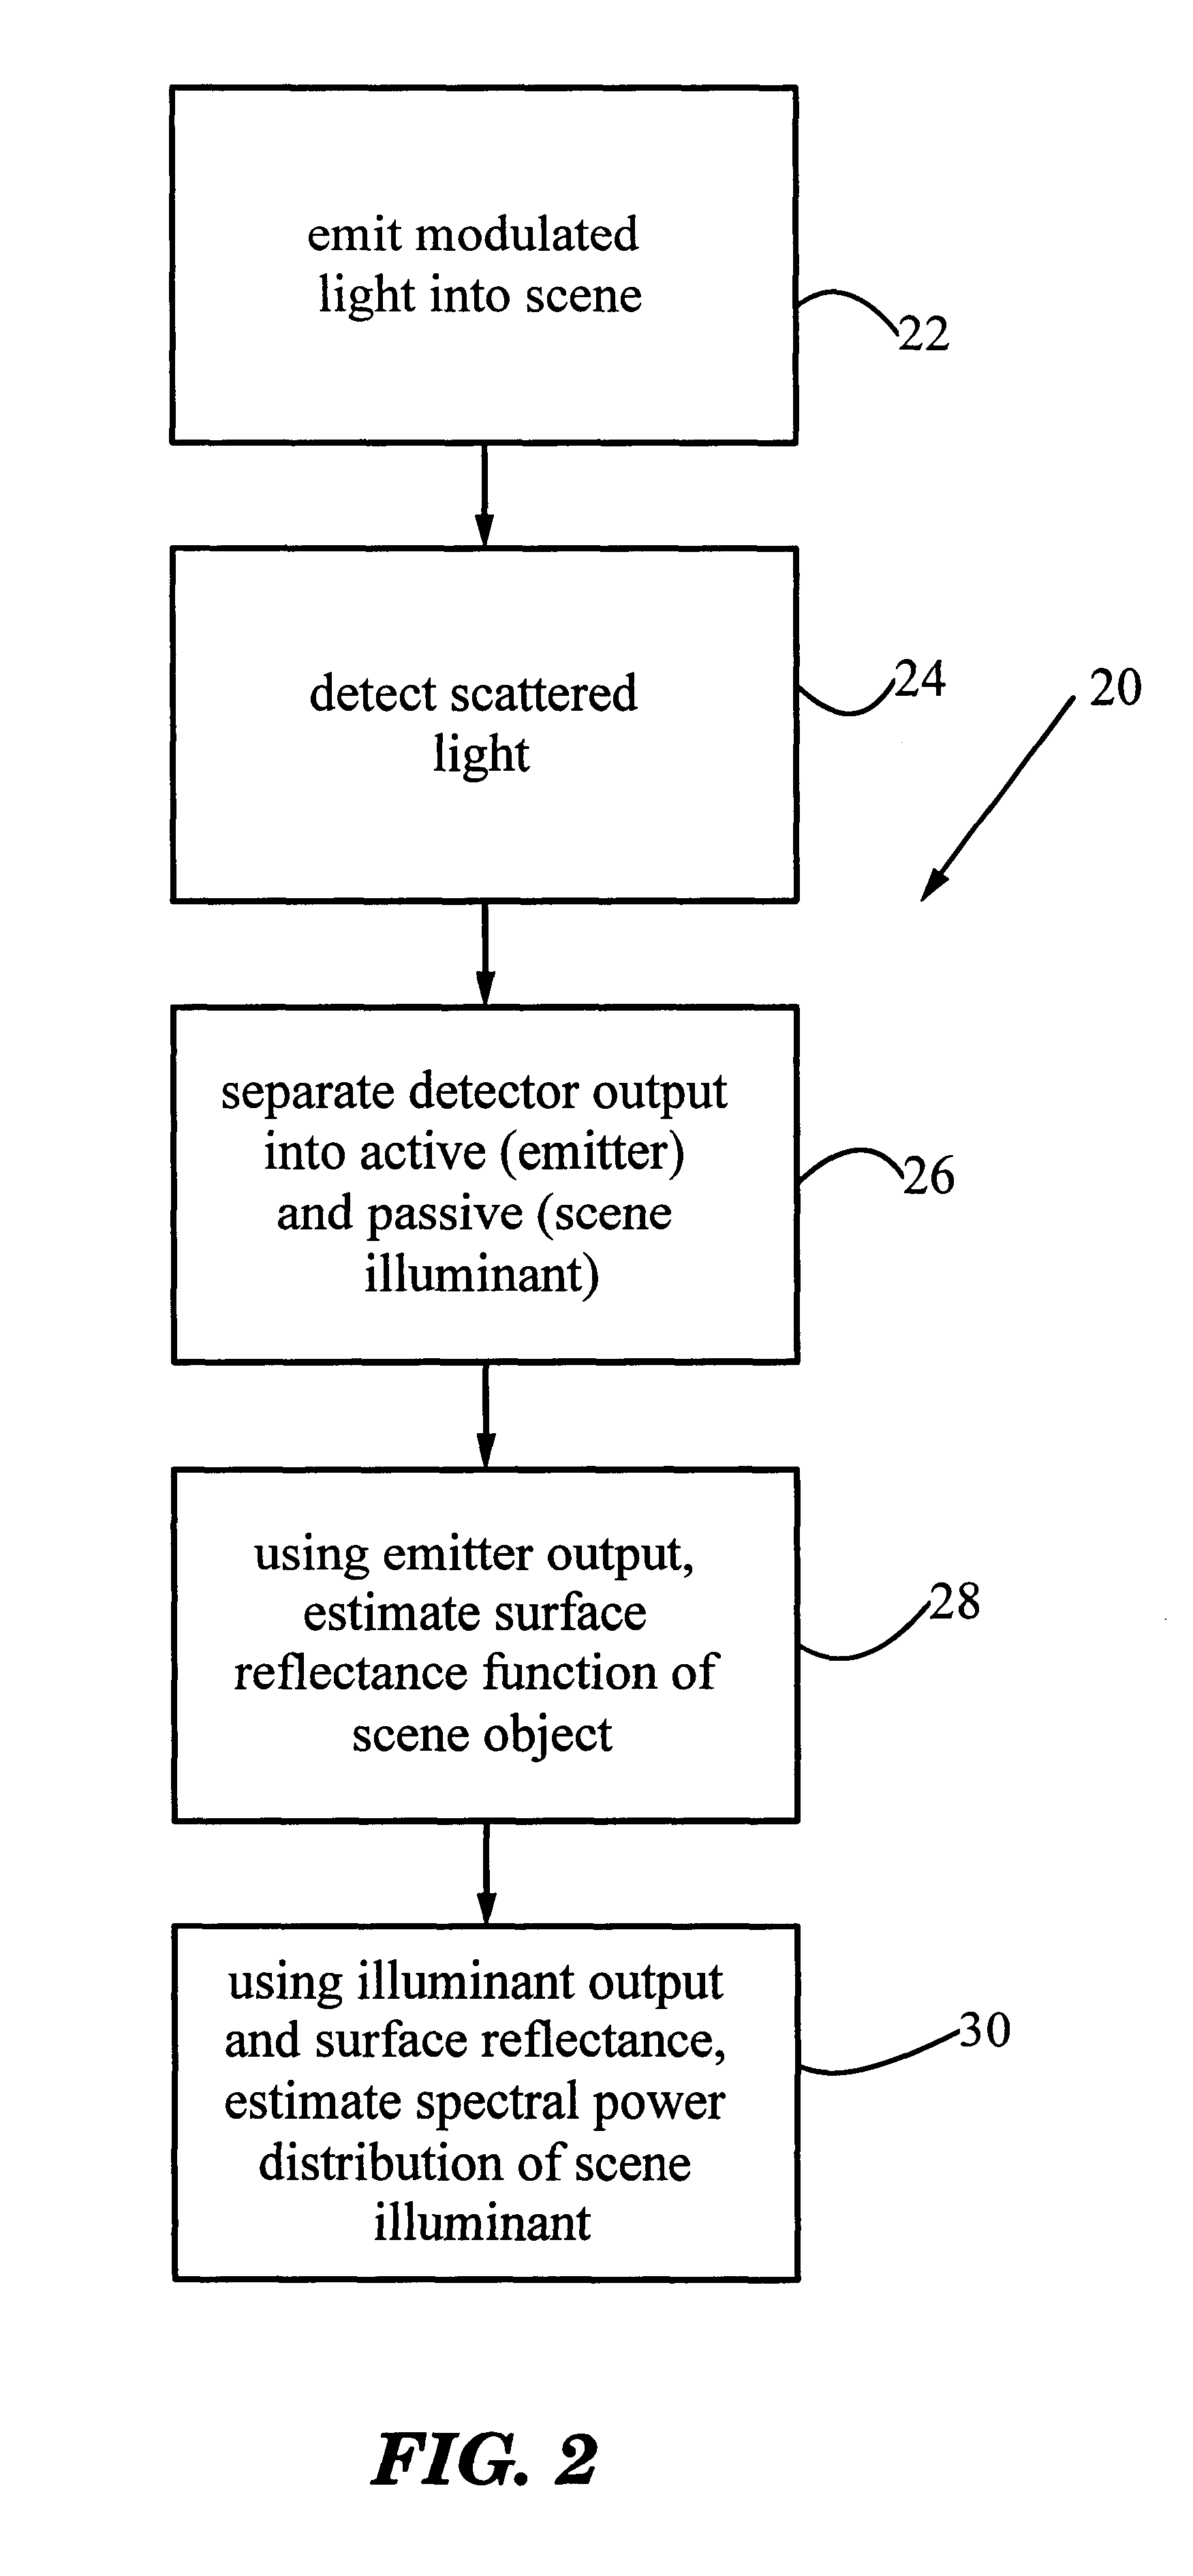 System and method for estimating physical properties of objects and illuminants in a scene using modulated light emission